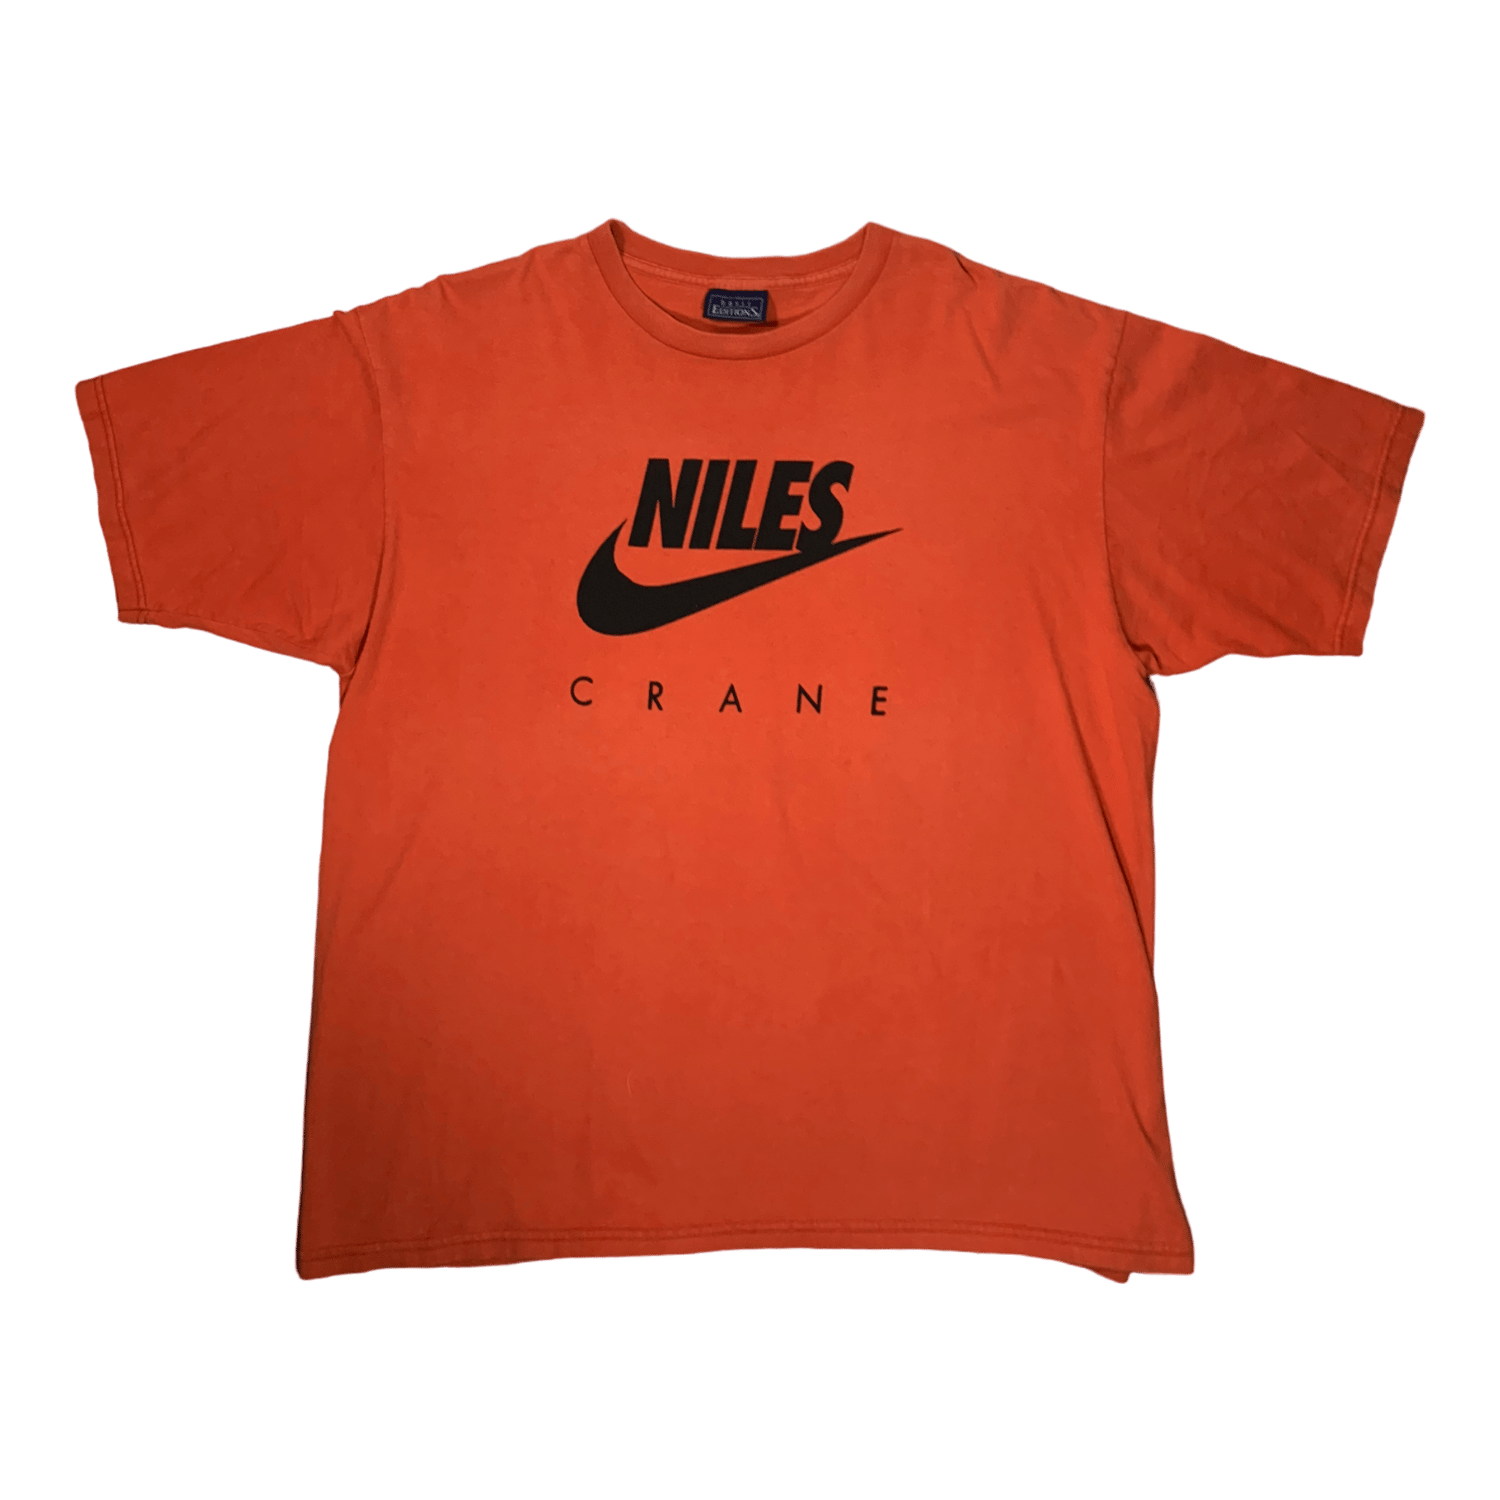 NILES T-SHIRT — Faded Red XL